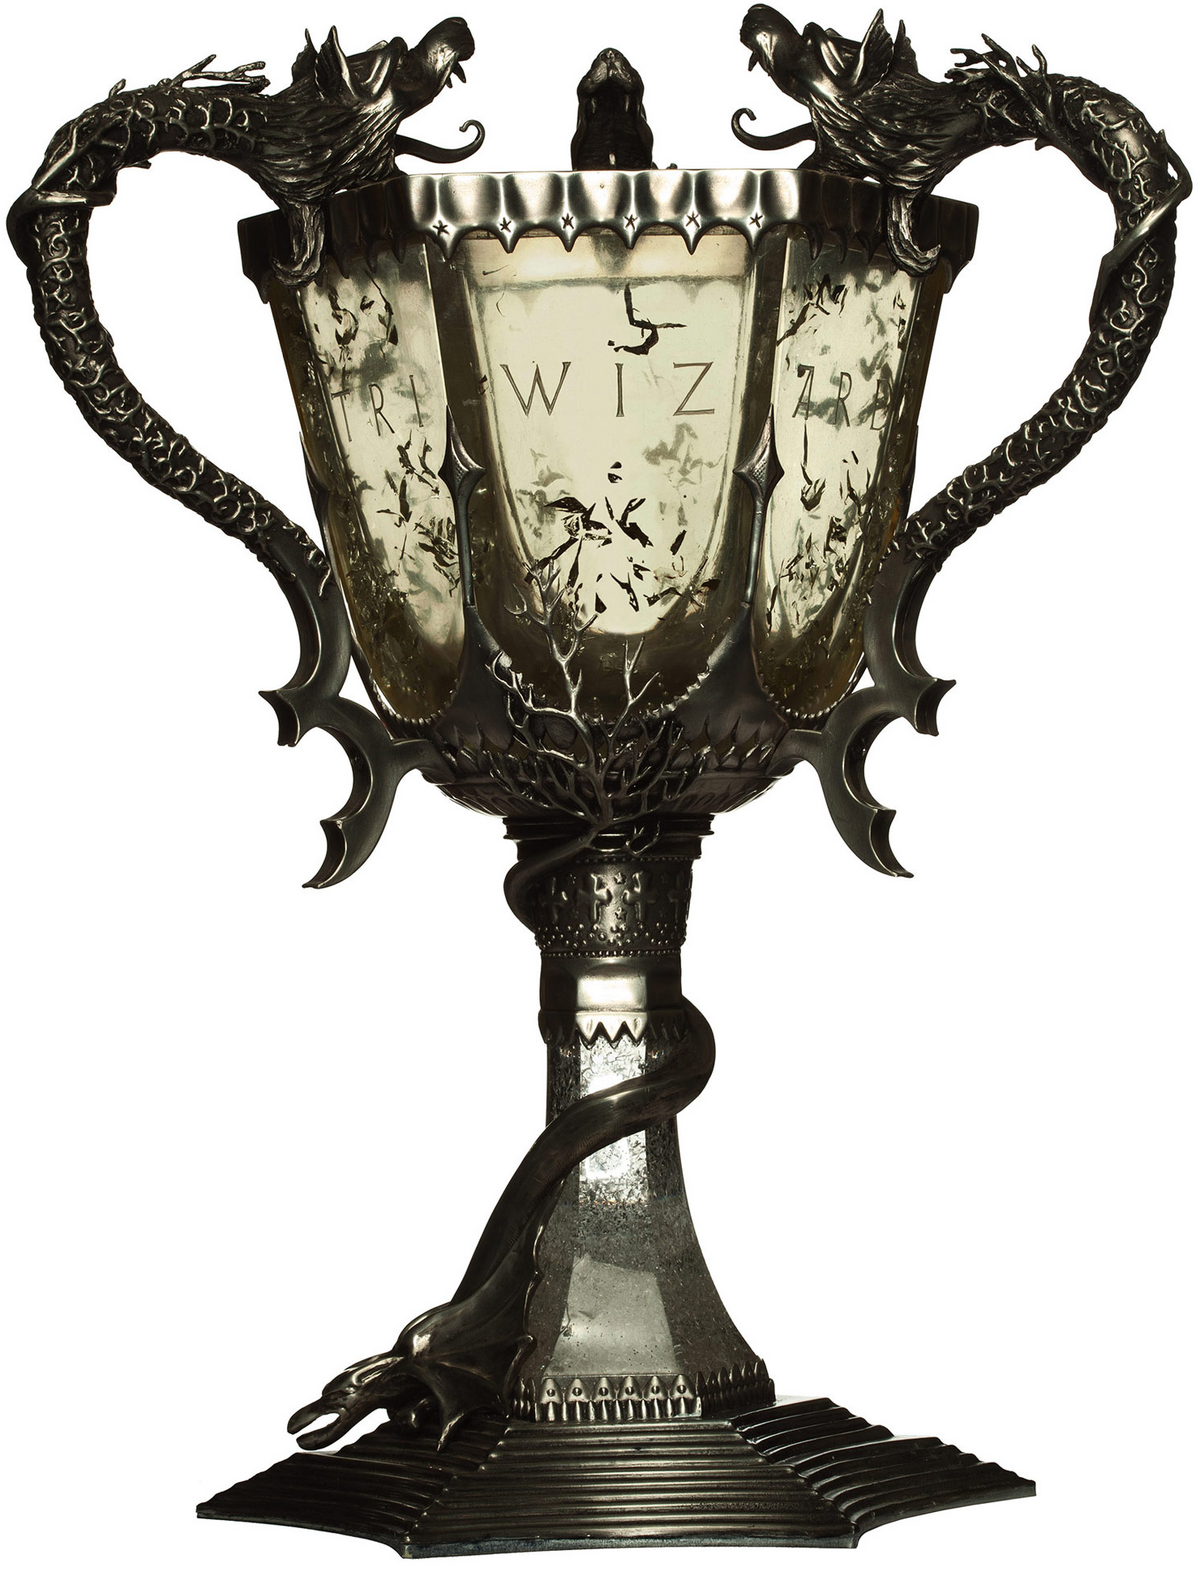 Triwizard Cup, Harry Potter Wiki